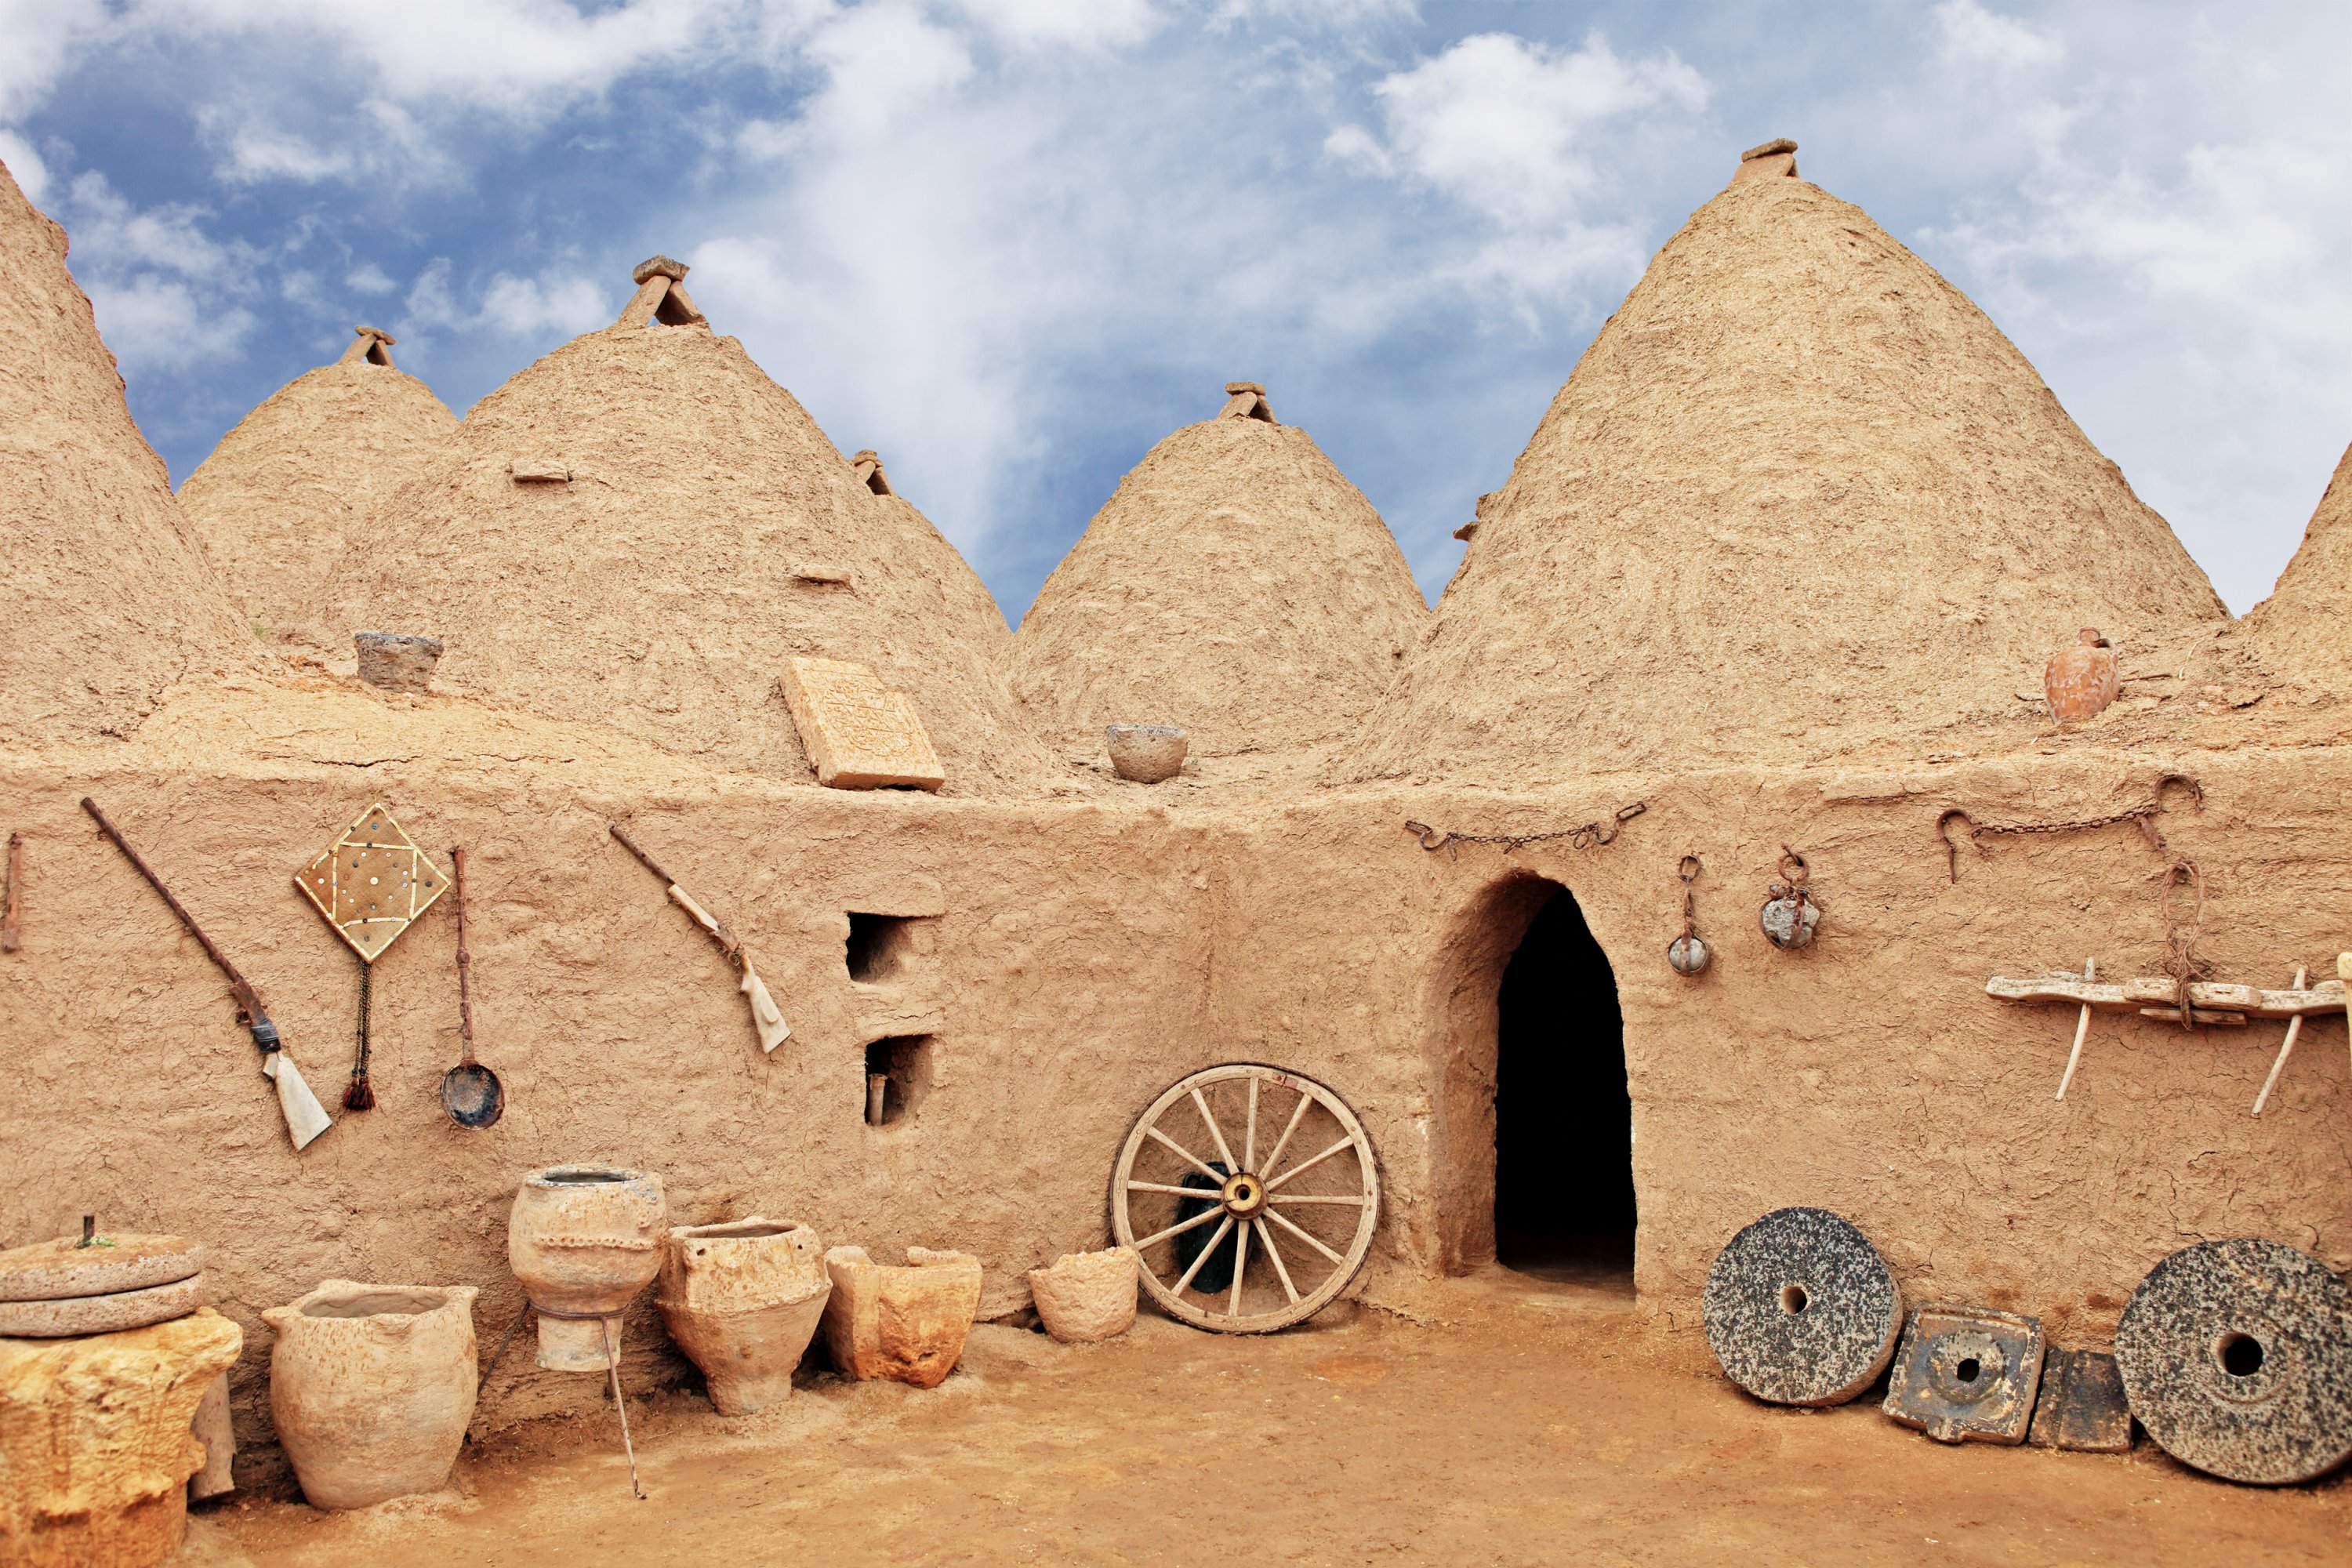 Harran is known for its beehive-domed vernacular houses. (iStock Photo)